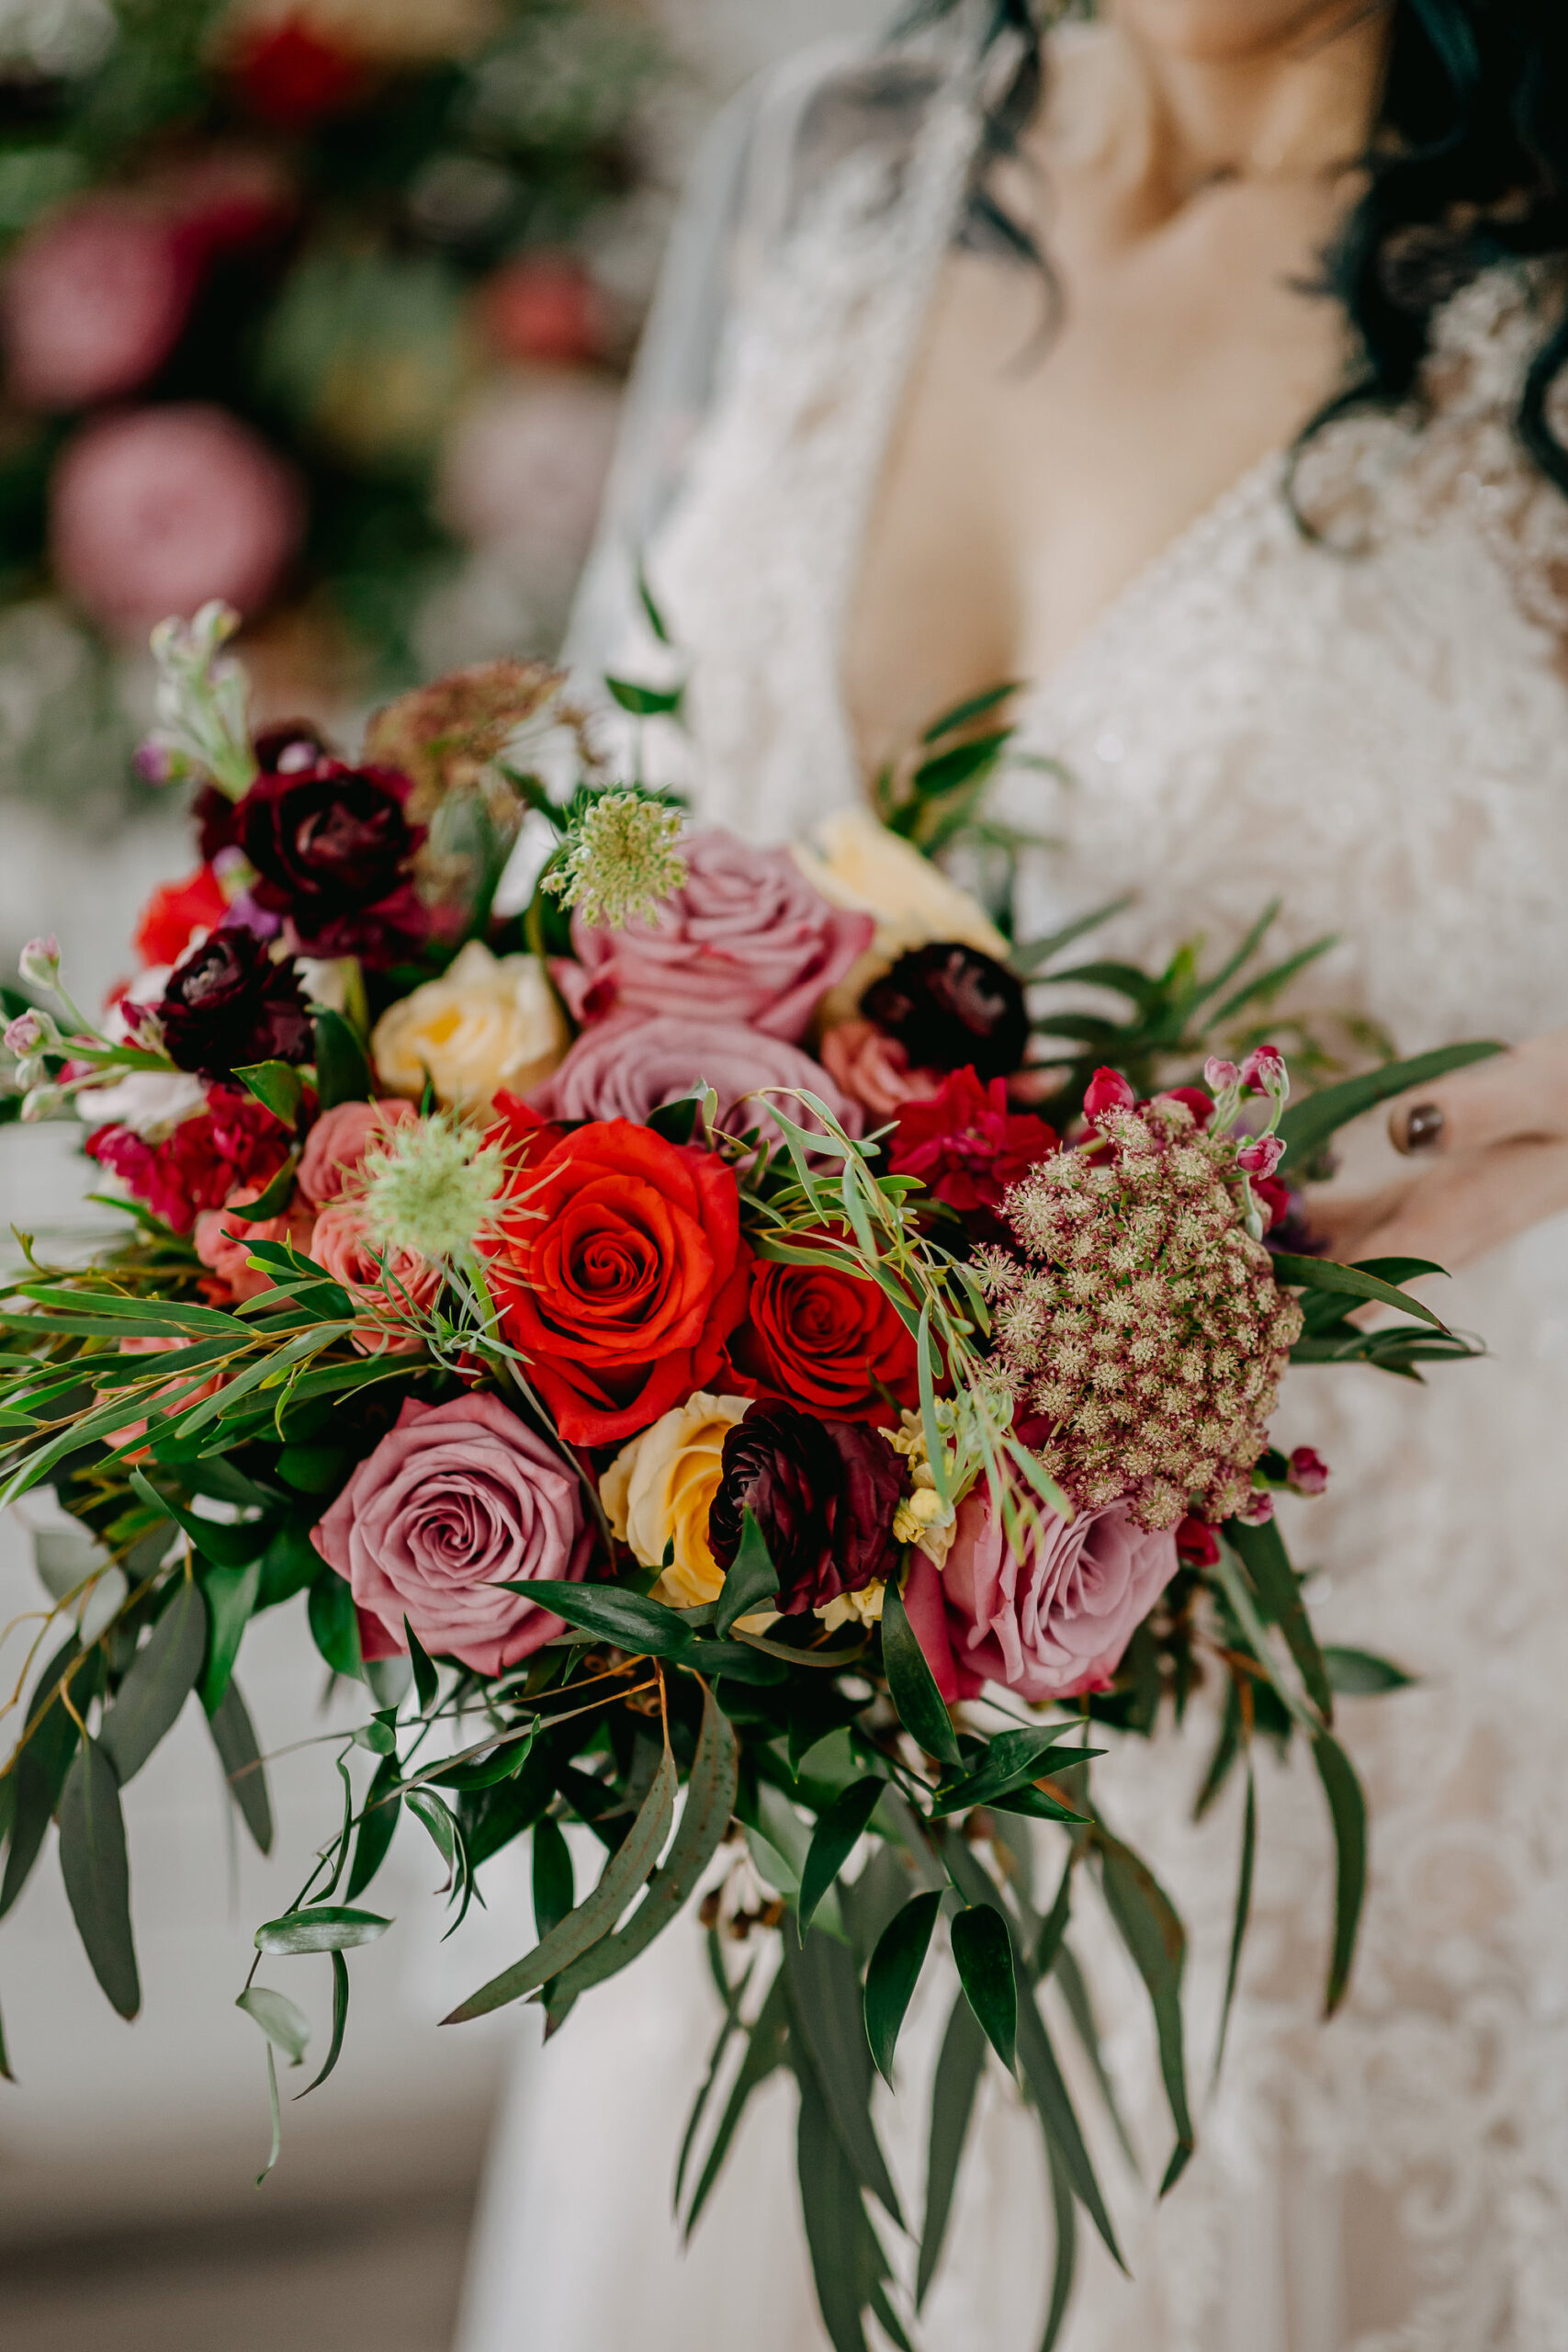 Maroon, Red, Pink, and Yellow Roses with Greenery Cascading Wedding Bridal Bouquet | Tampa Bay Florist Monarch Events And Design